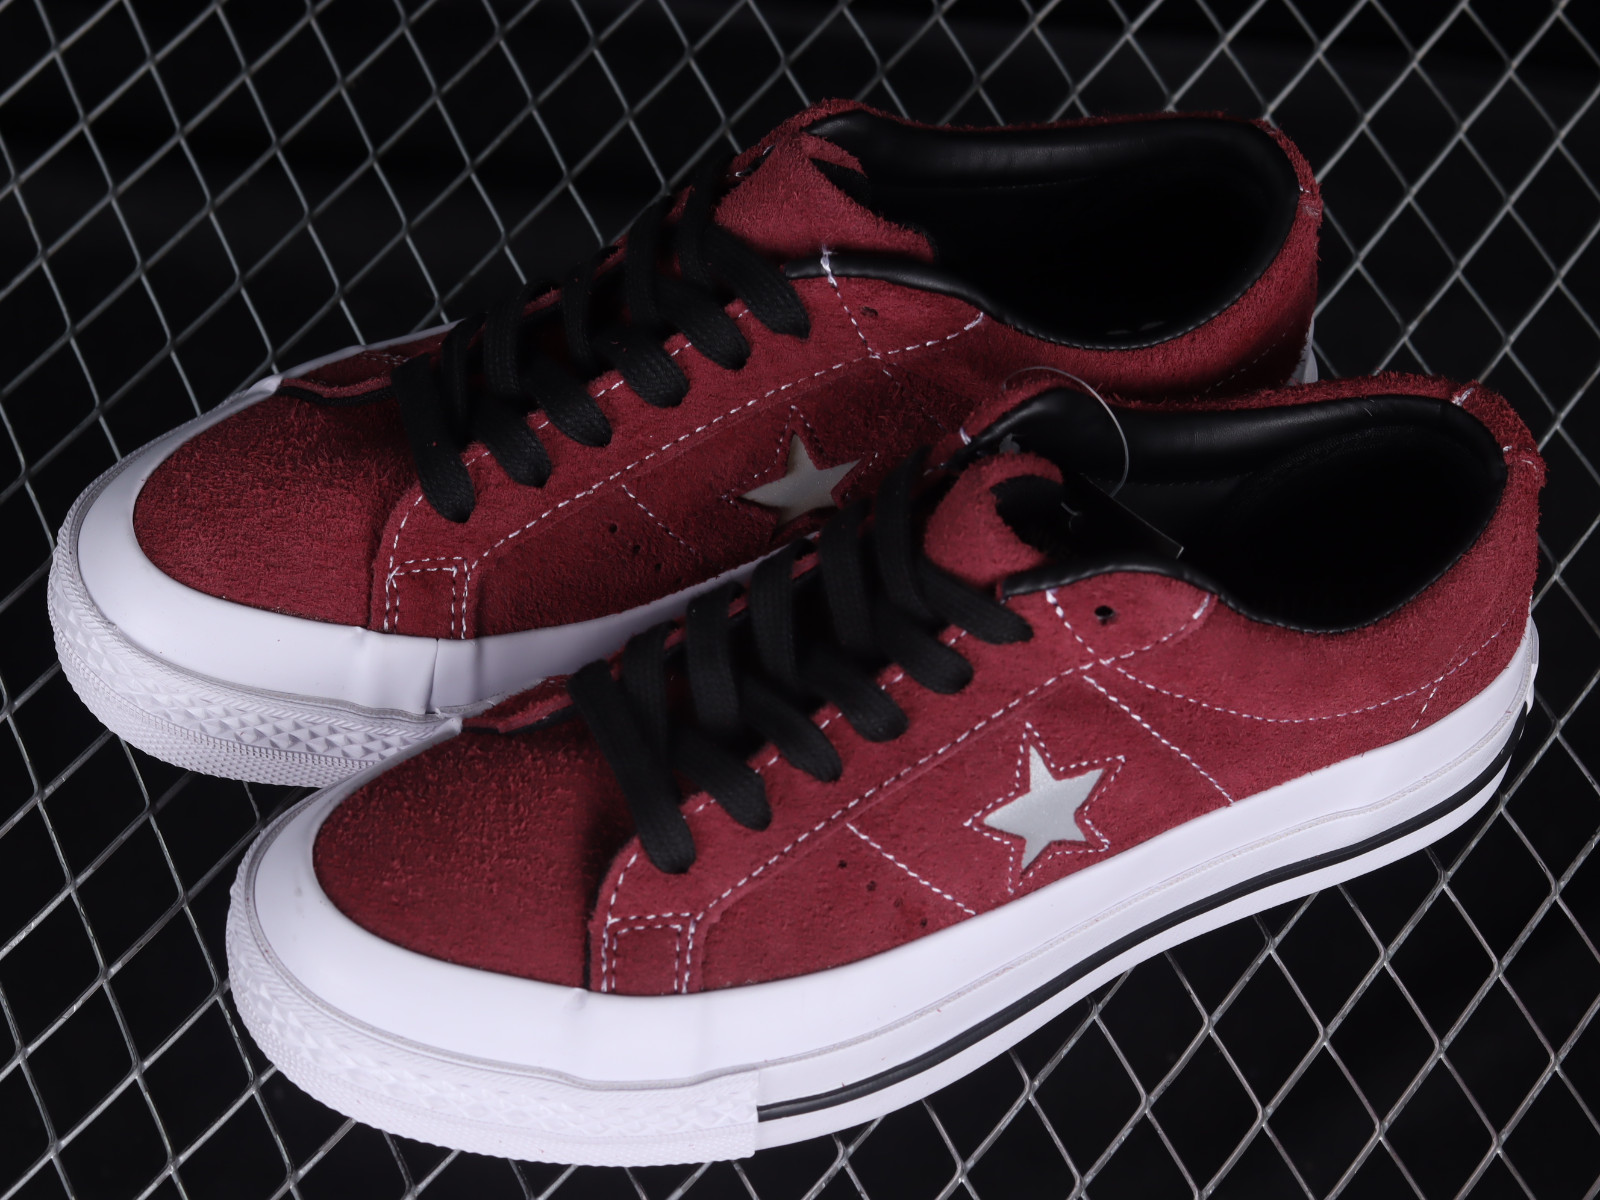 Converse One Star Low Top Rose Red White 165955C MultiscaleconsultingShops